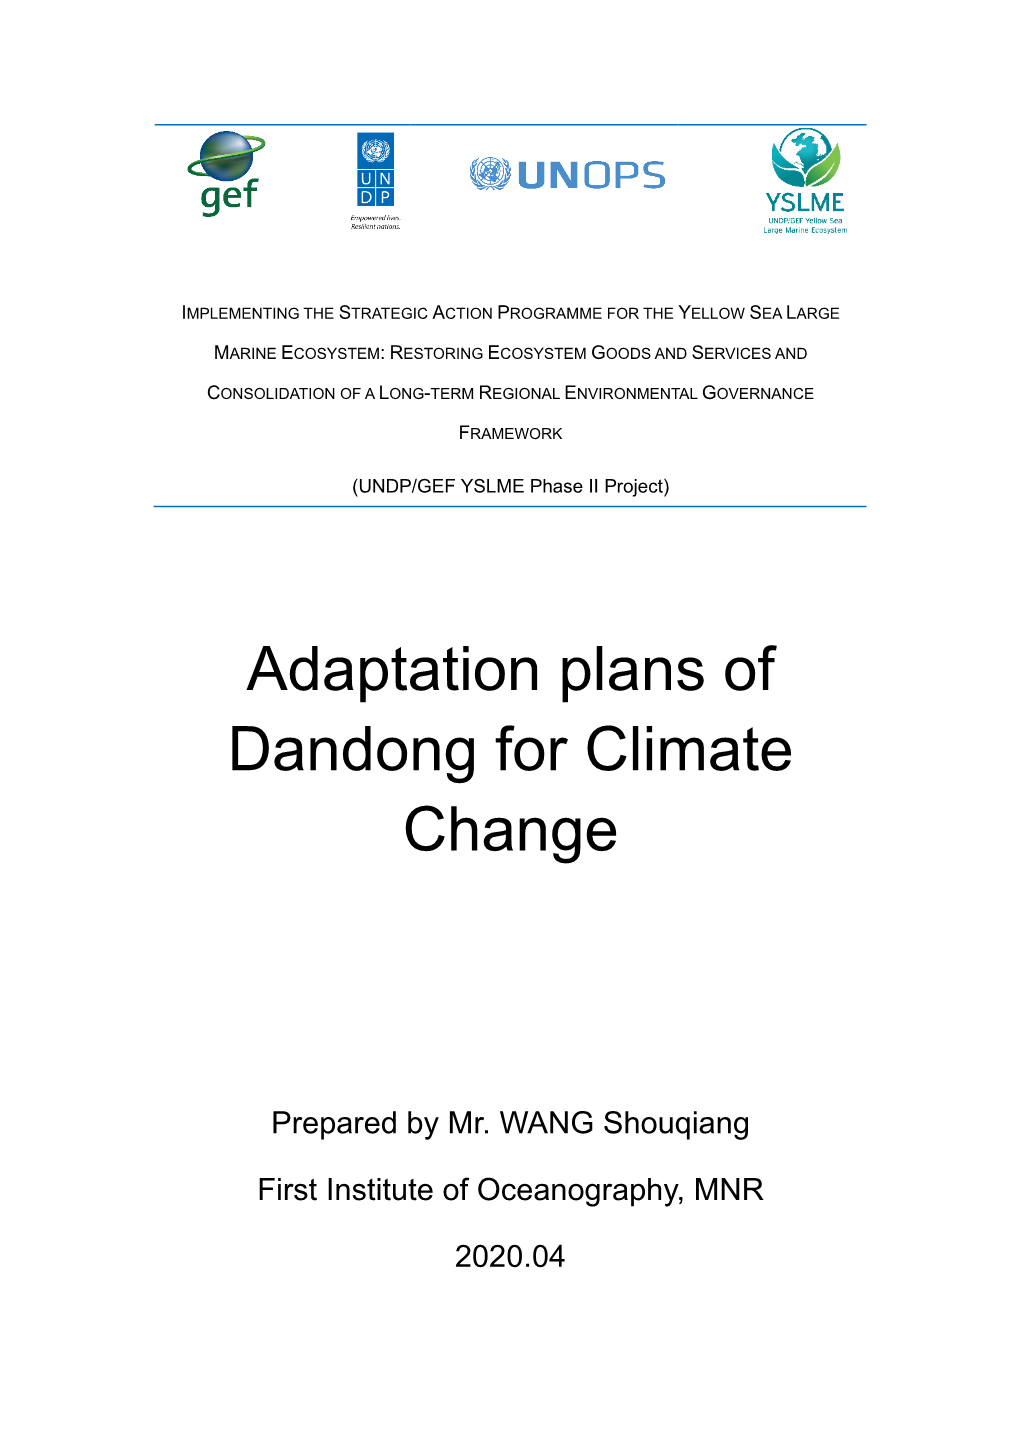 Adaptation Plans of Dandong for Climate Change